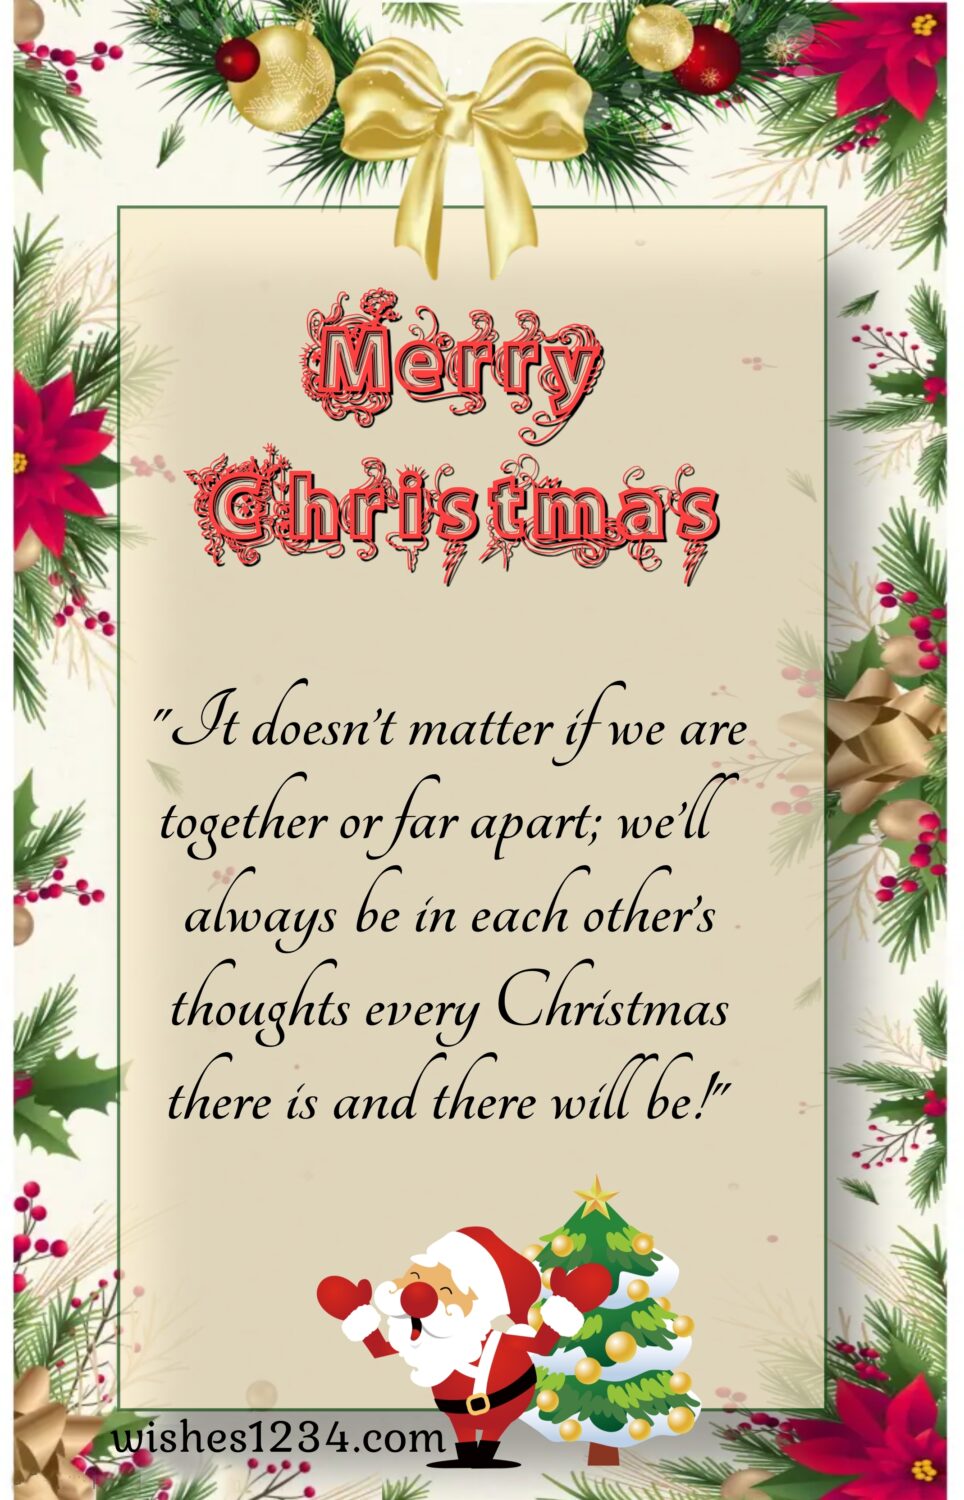 Merry Christmas postcard, Merry Christmas Quotes & short wishes.